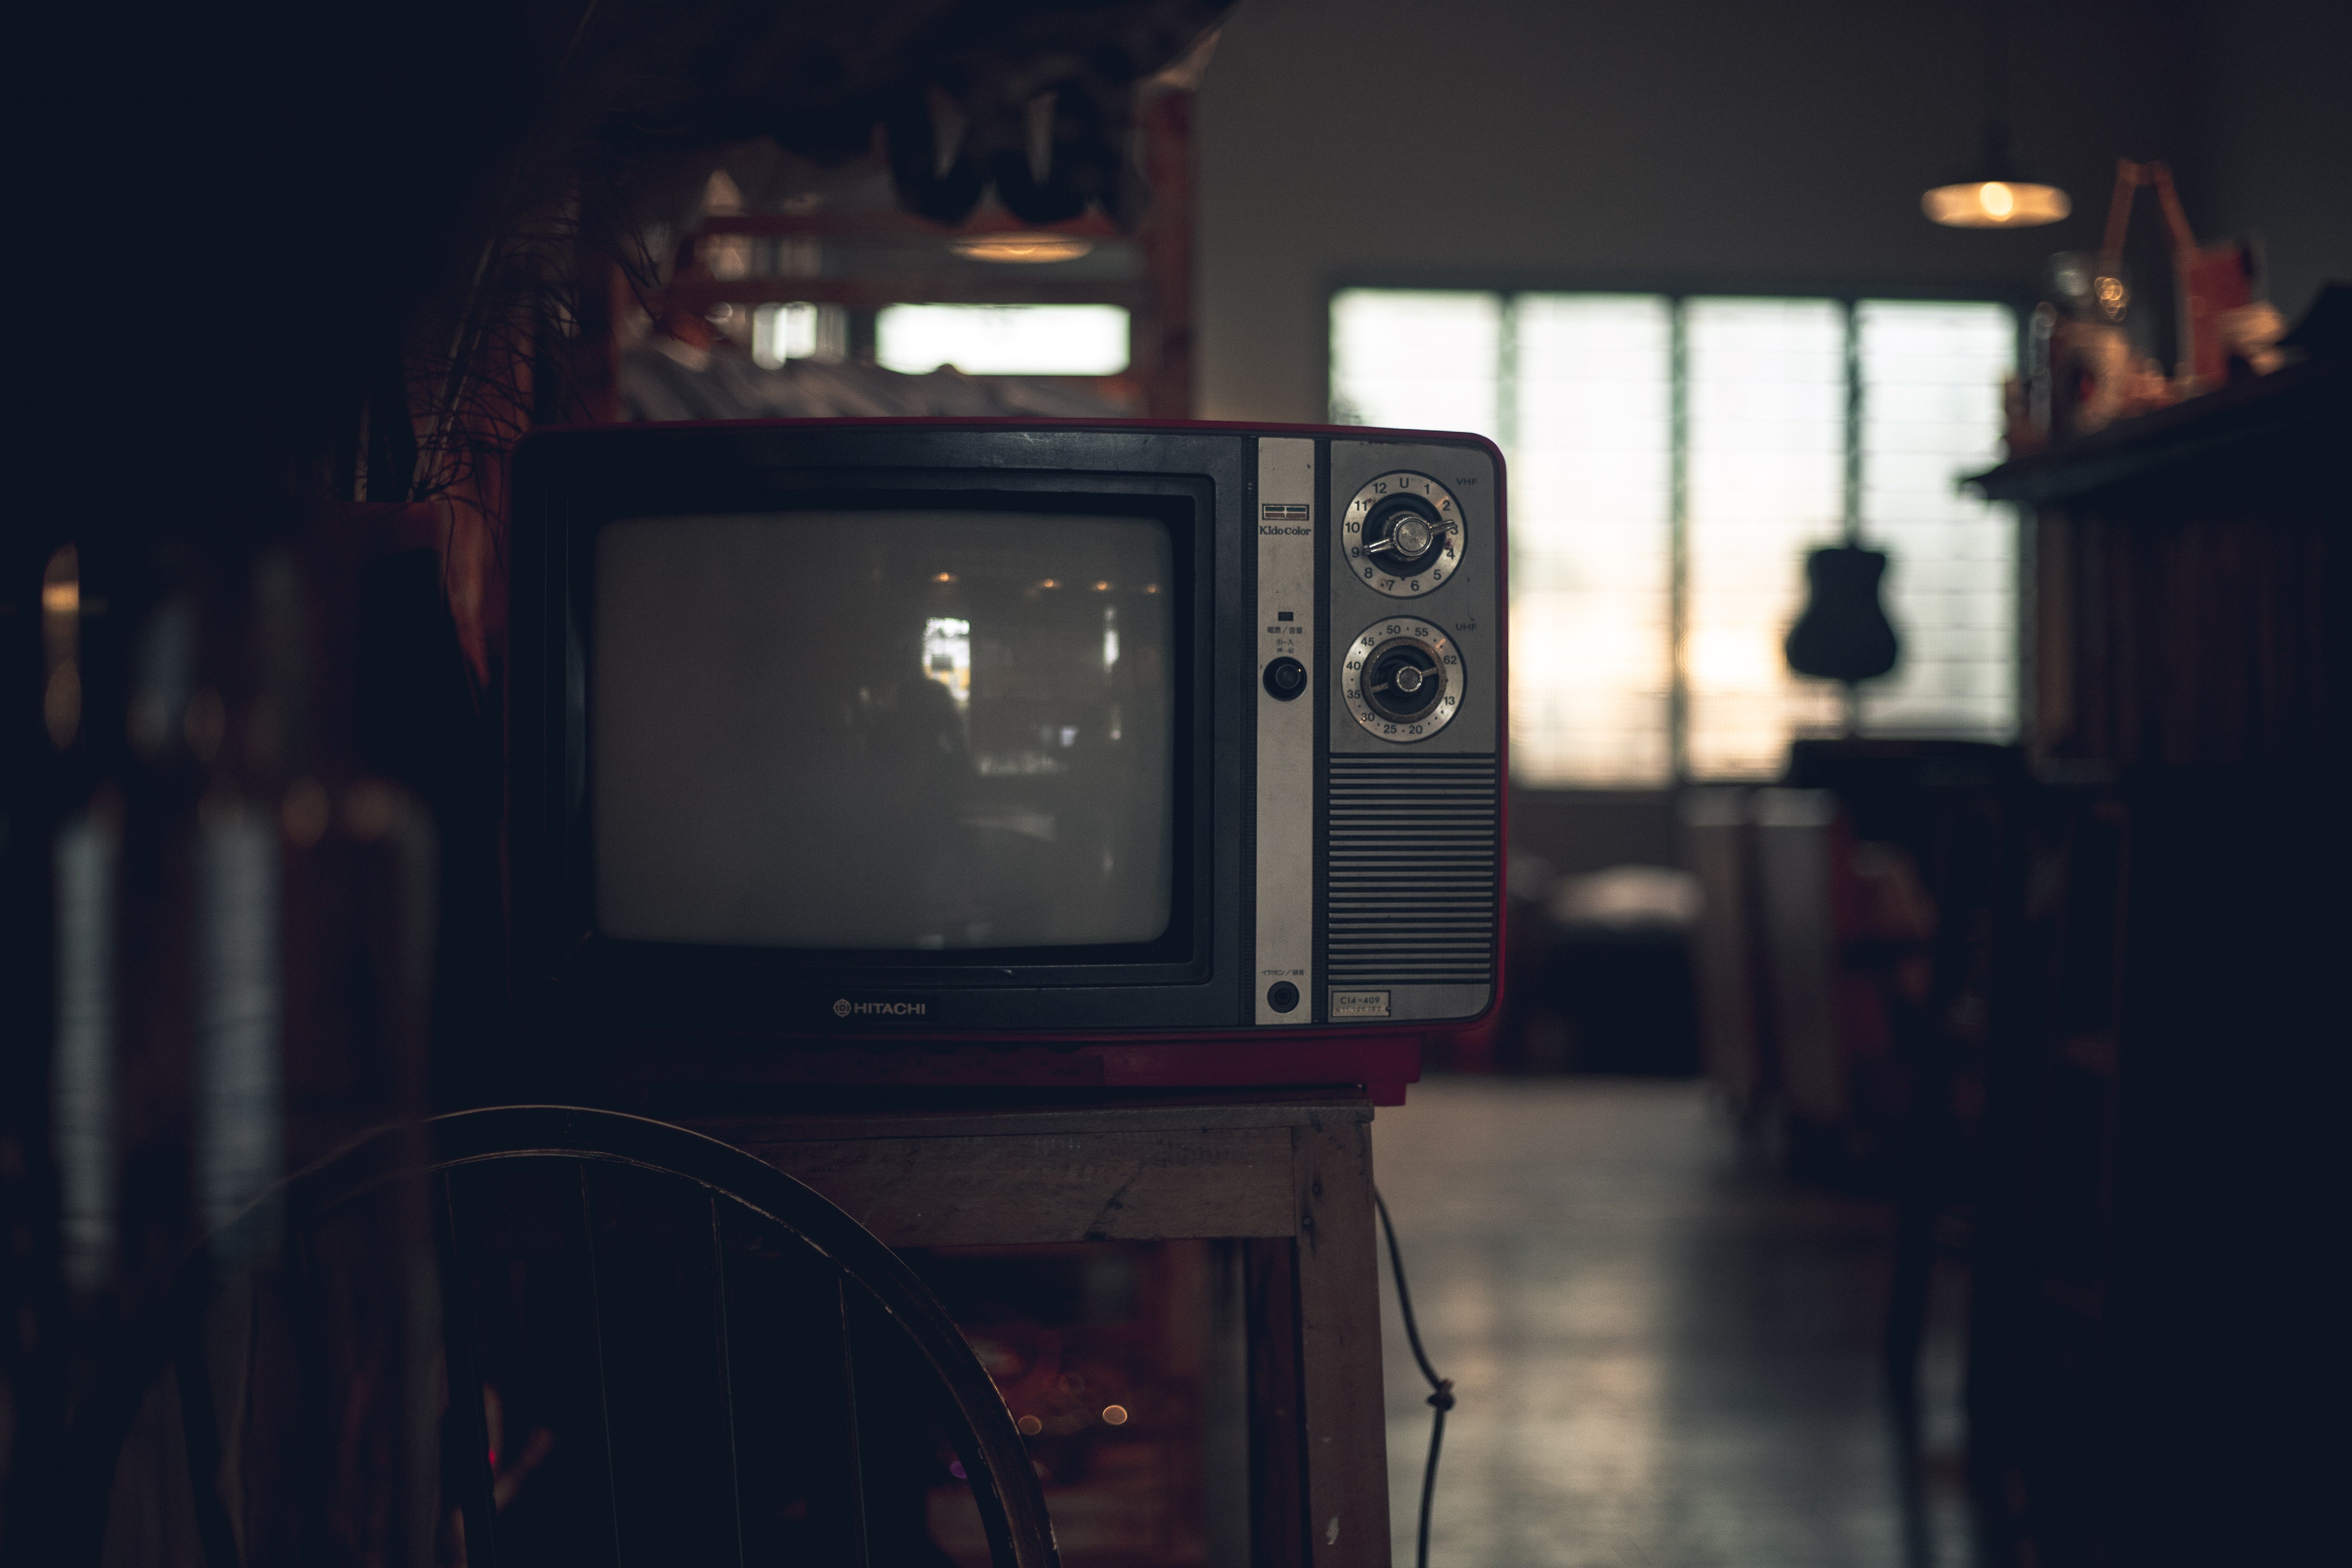 Watching the TV was not encouraging for her health at that age | Source: Pexels 